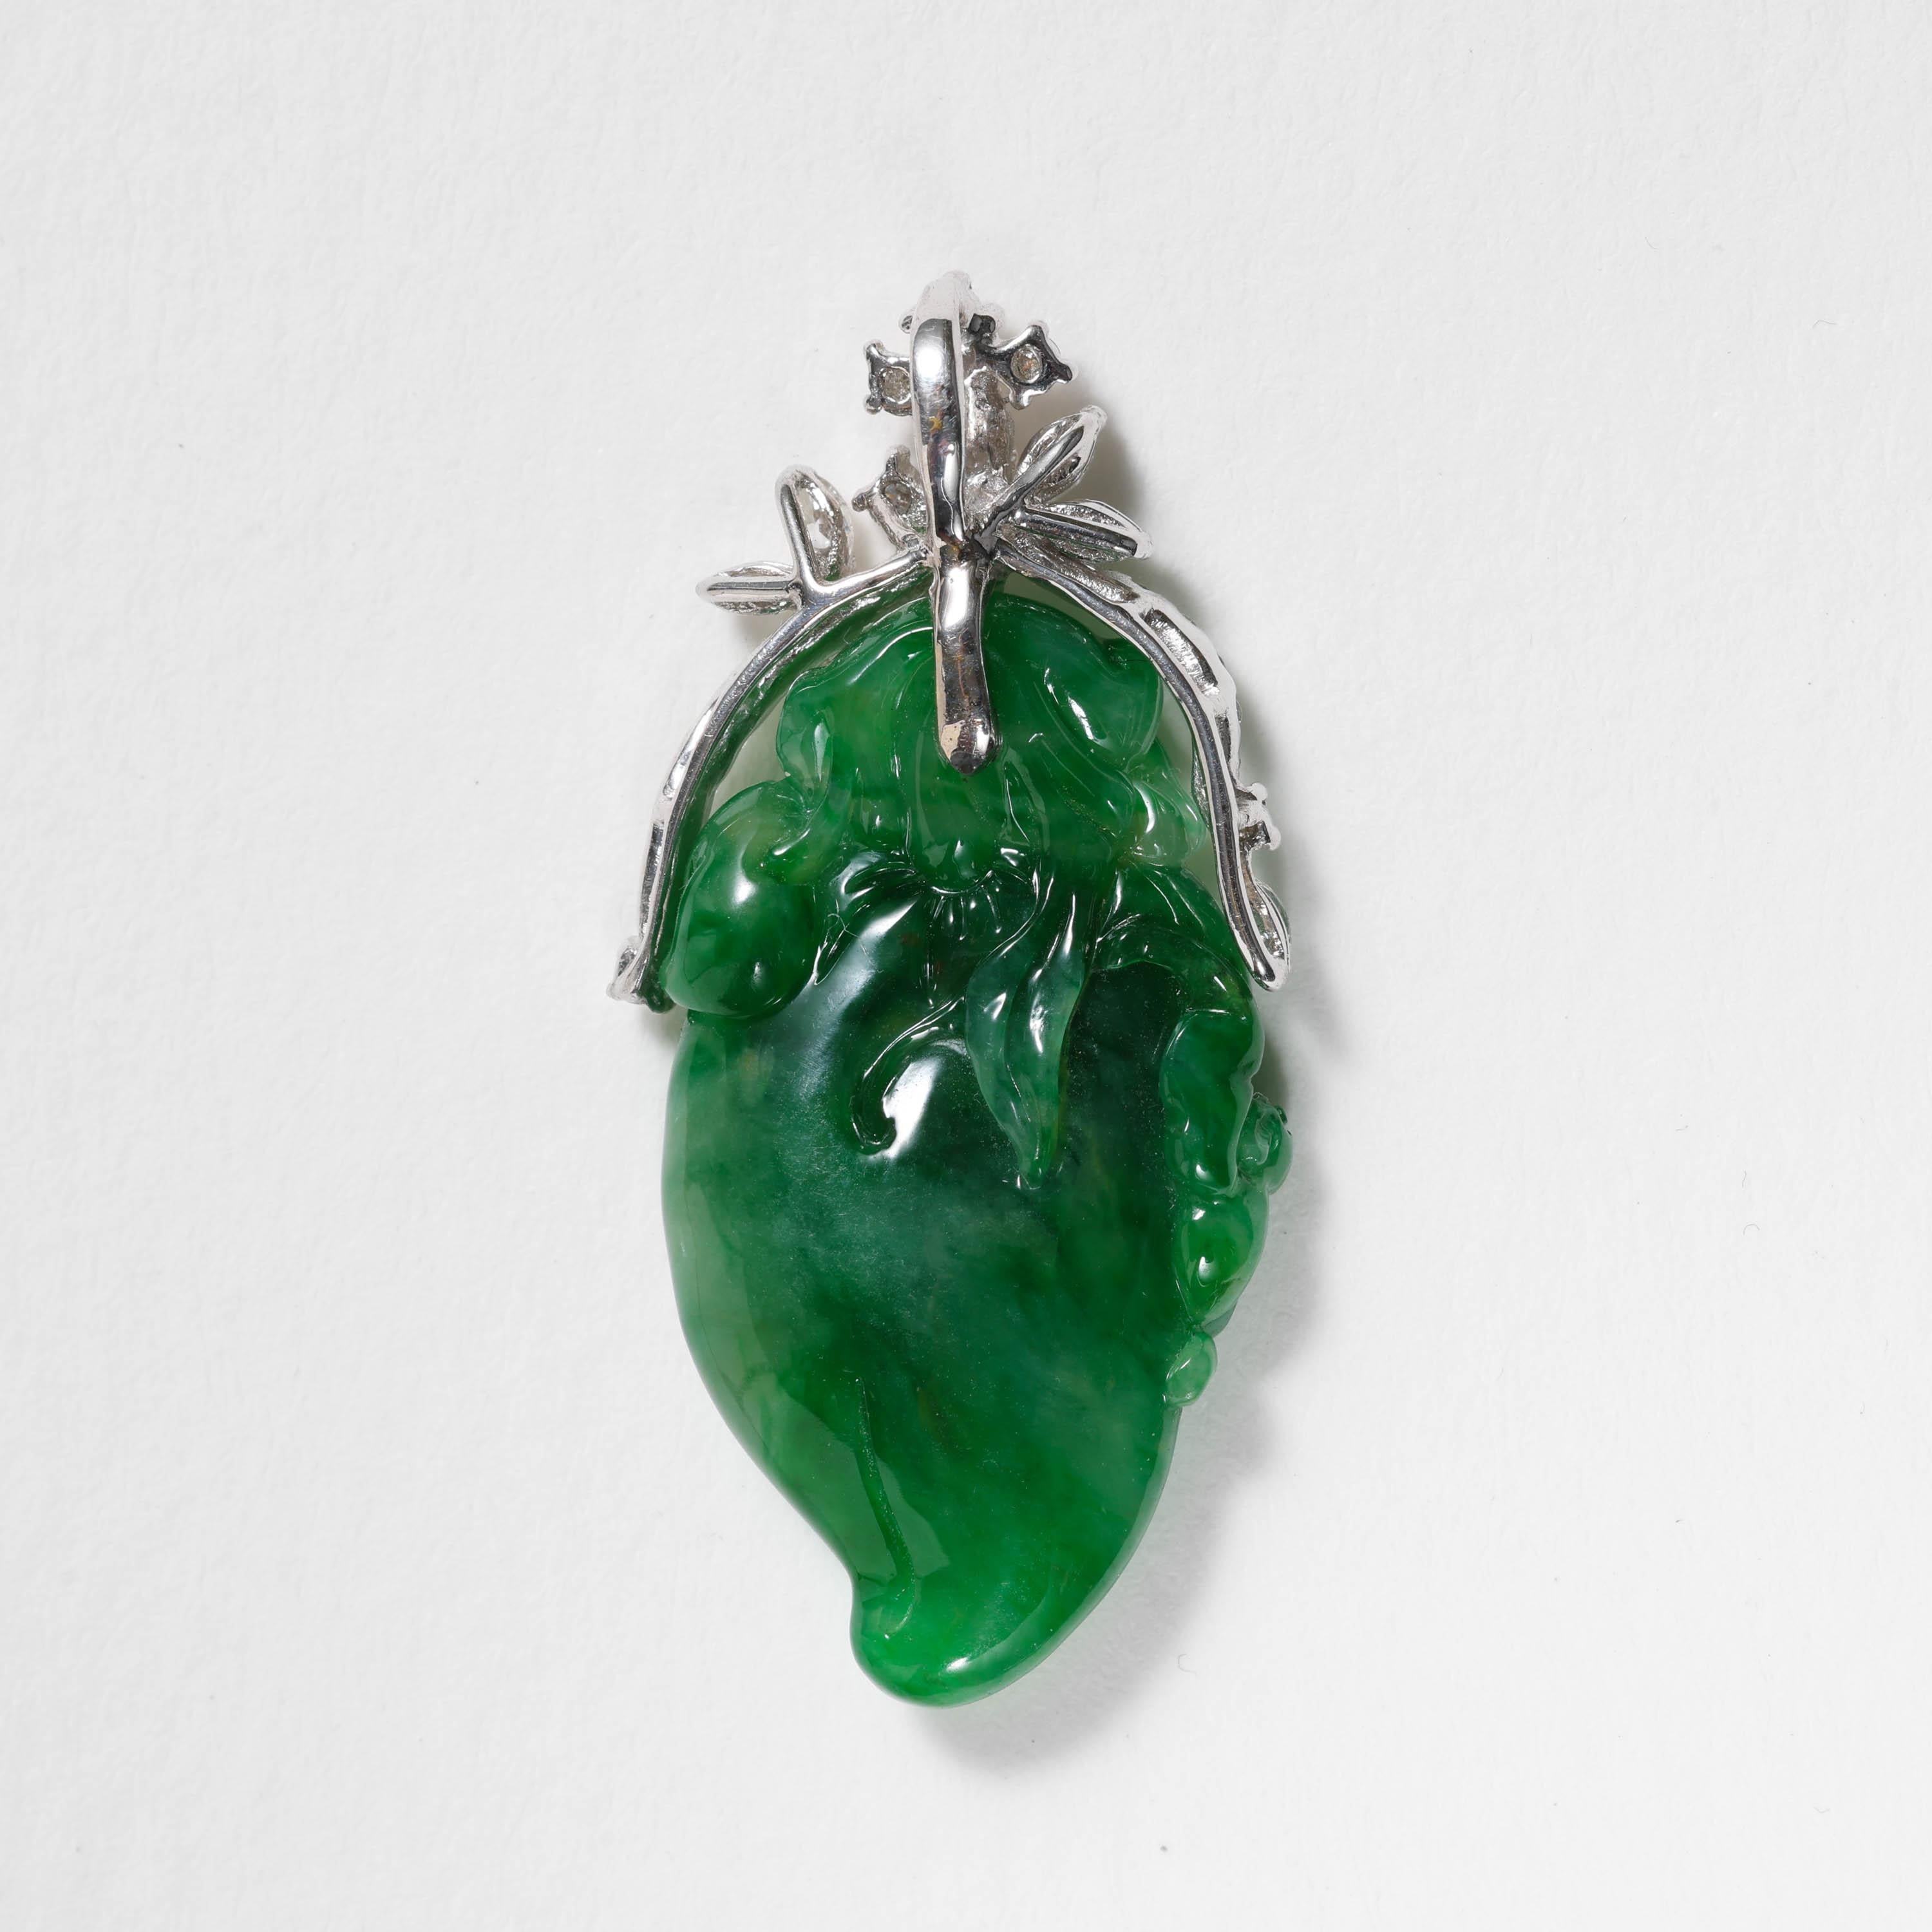 Rich, emerald-green certified natural and untreated Burmese jadeite jade has been whimsically and masterfully carved into a chili pepper with leaves. An adorable, tiny bat clings to the side of the pepper. The symbolism here is prosperity and good